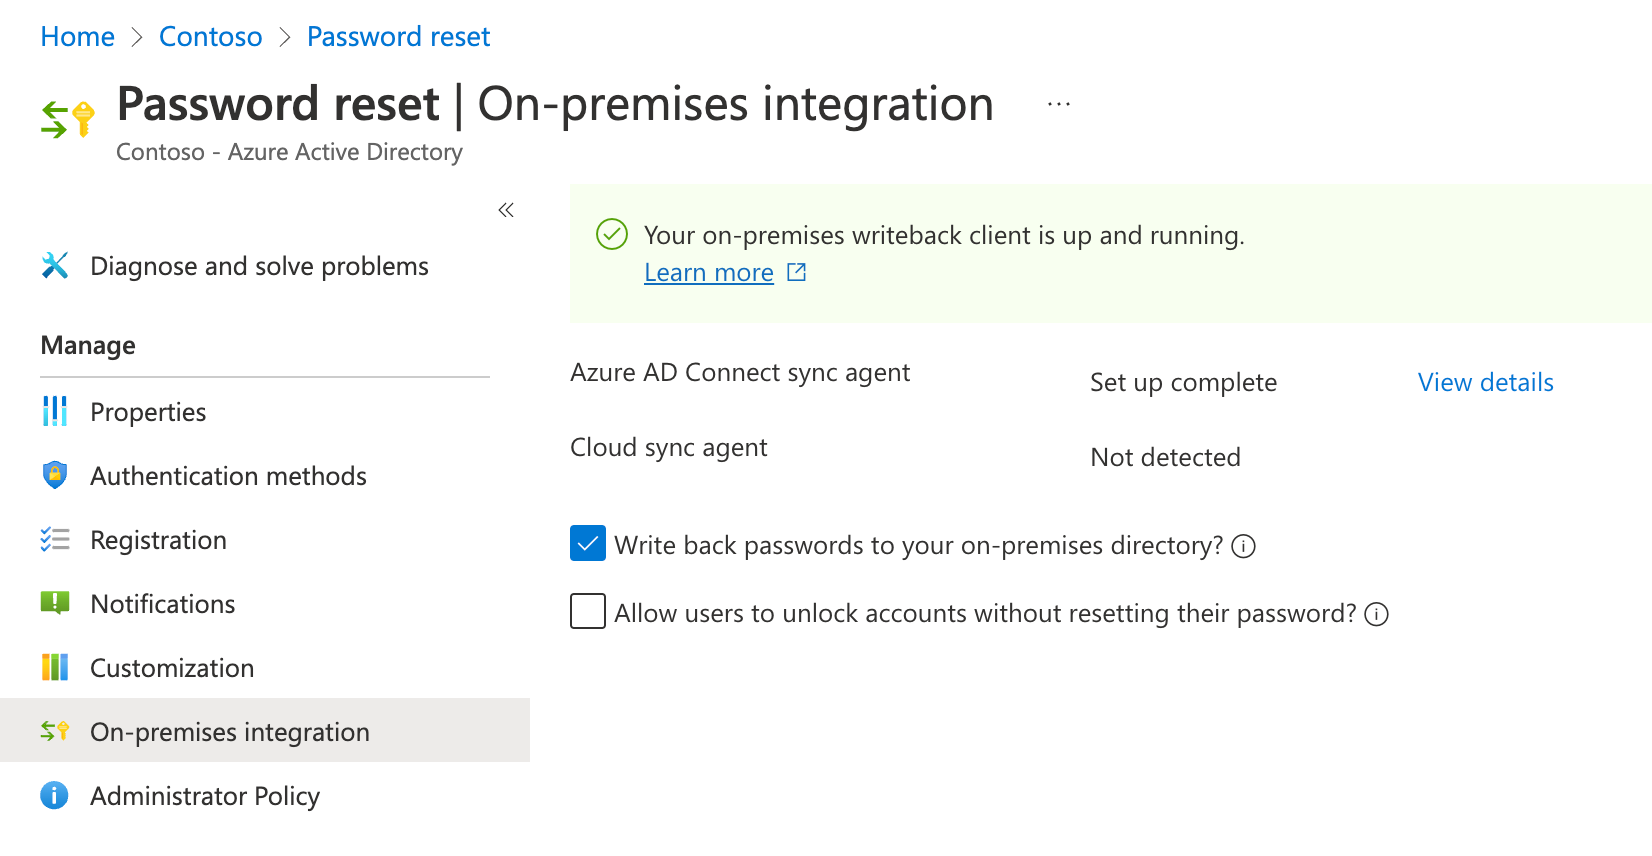 The on-premises integration screen for password reset in Azure AD showing the write back passwords to your on-premises directory selected.